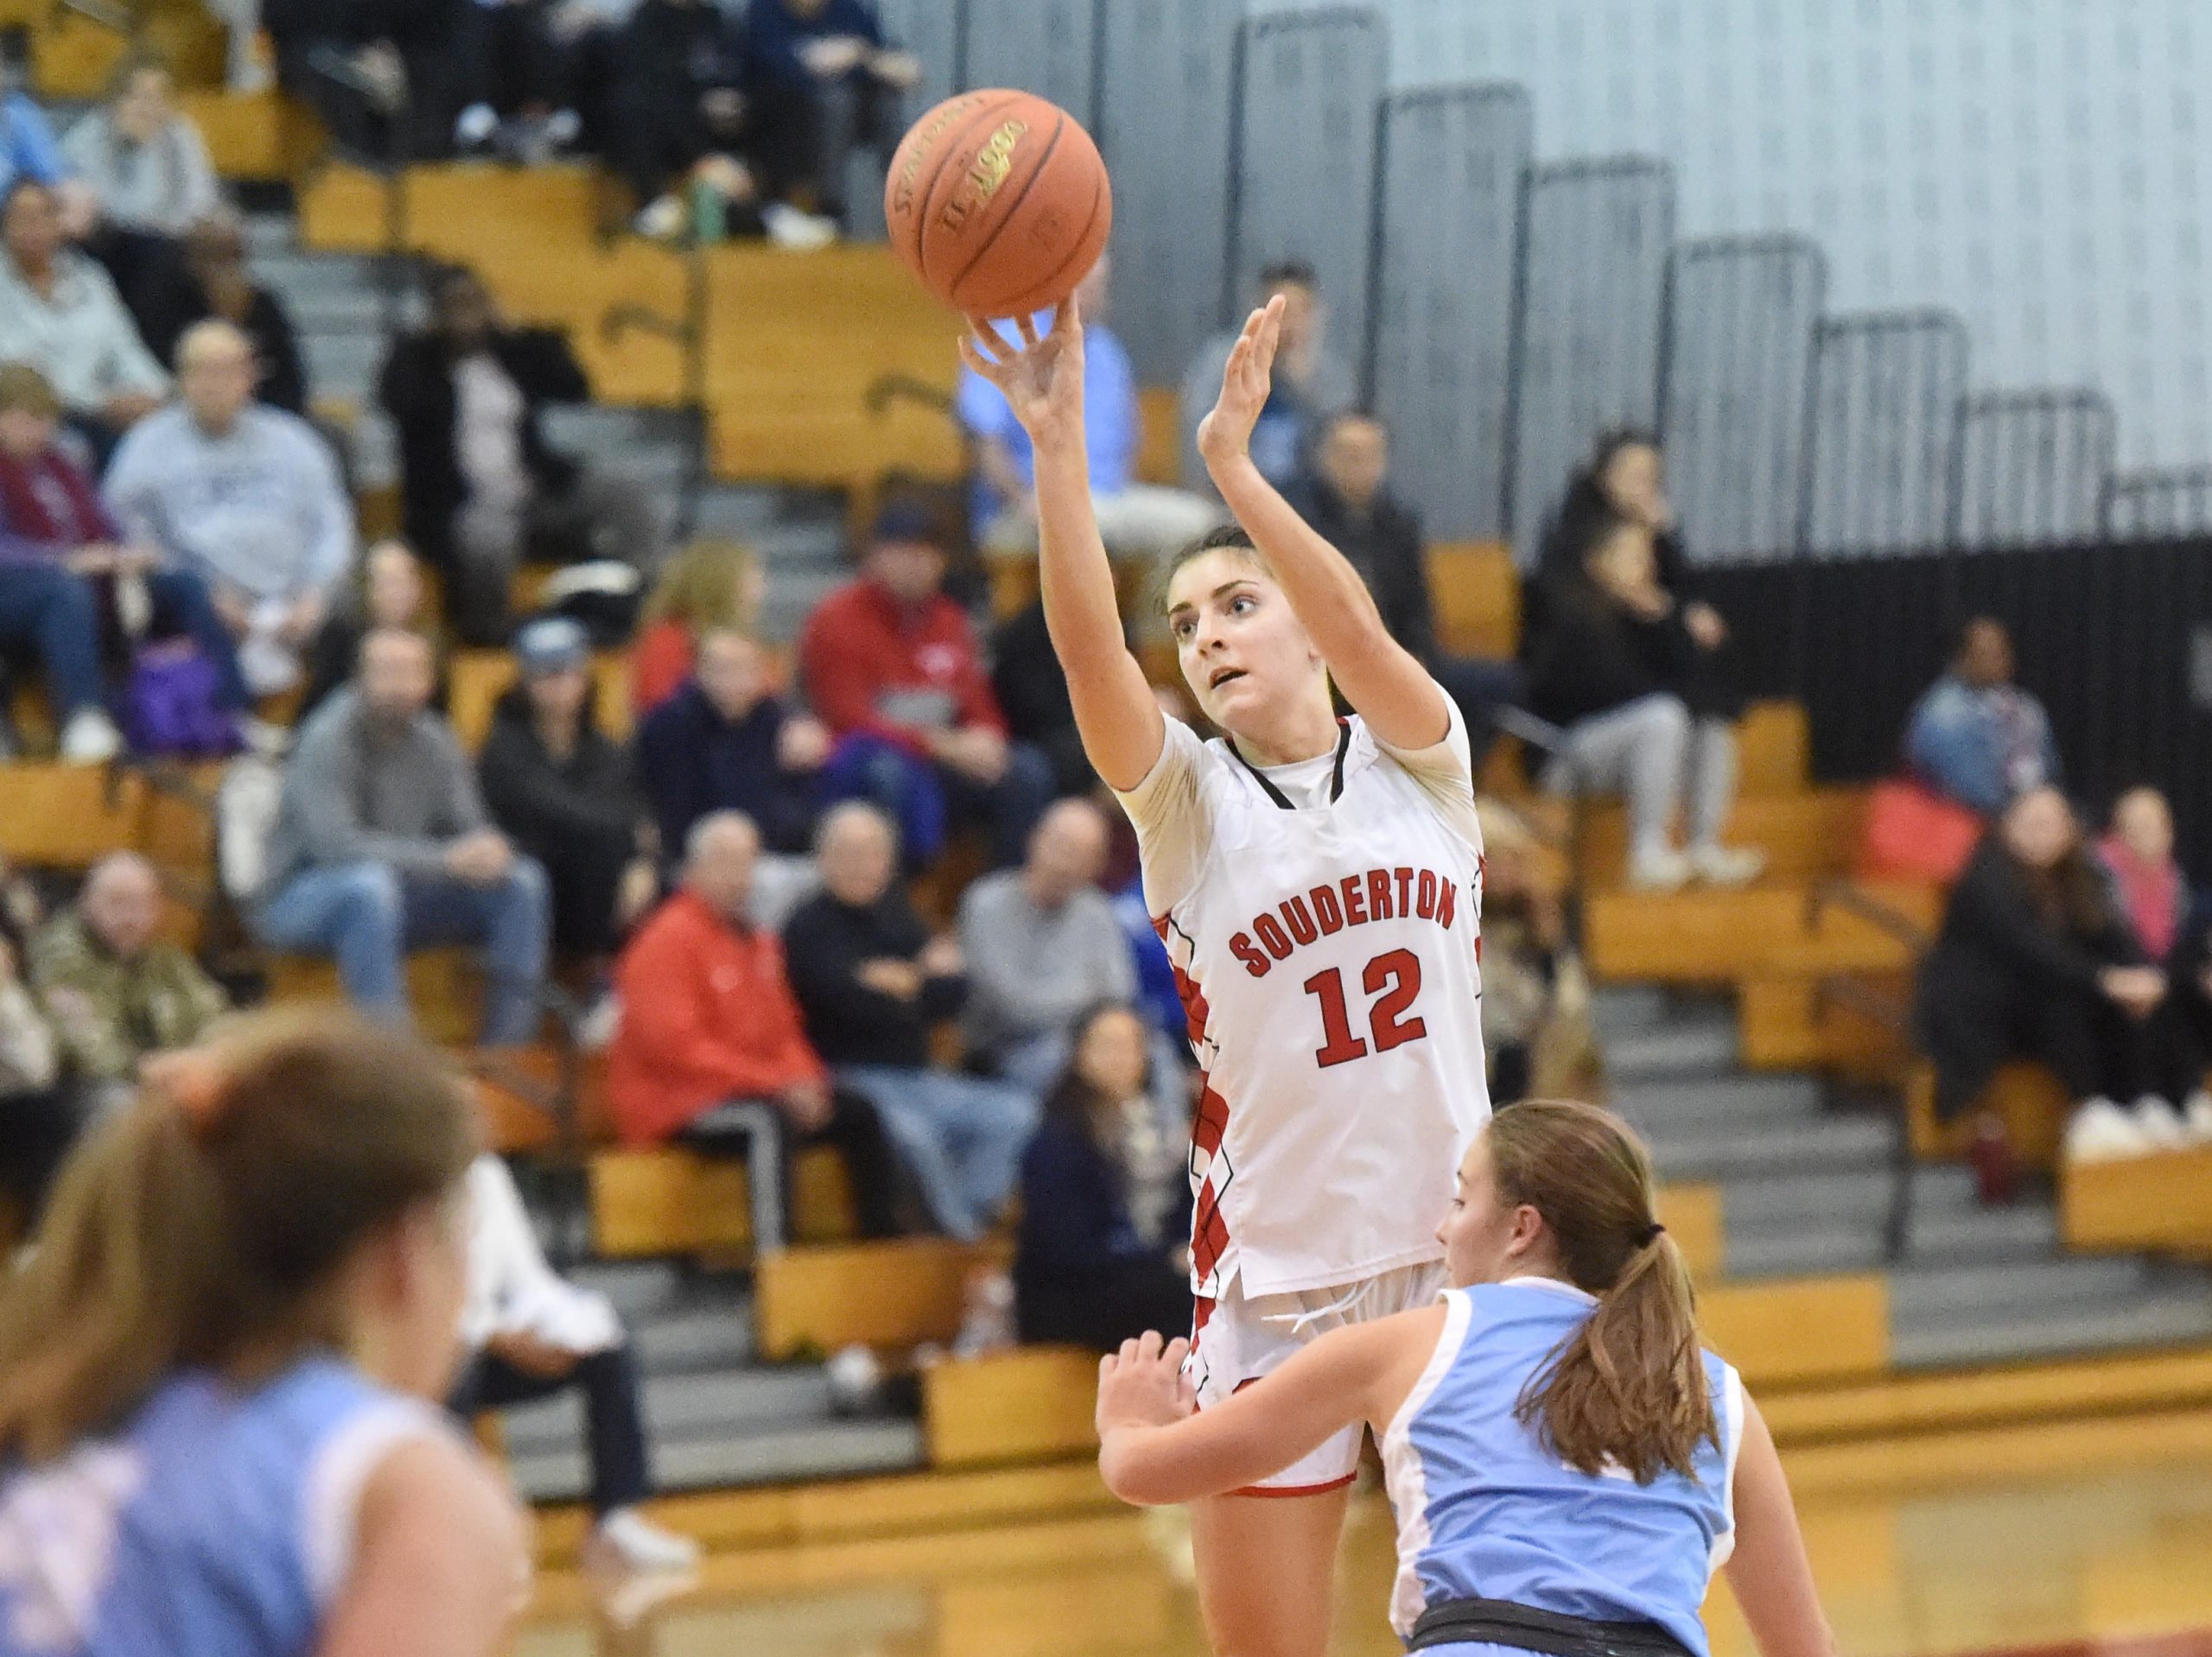 Harter scores 27, Souderton holds off North Penn for 3rd straight win